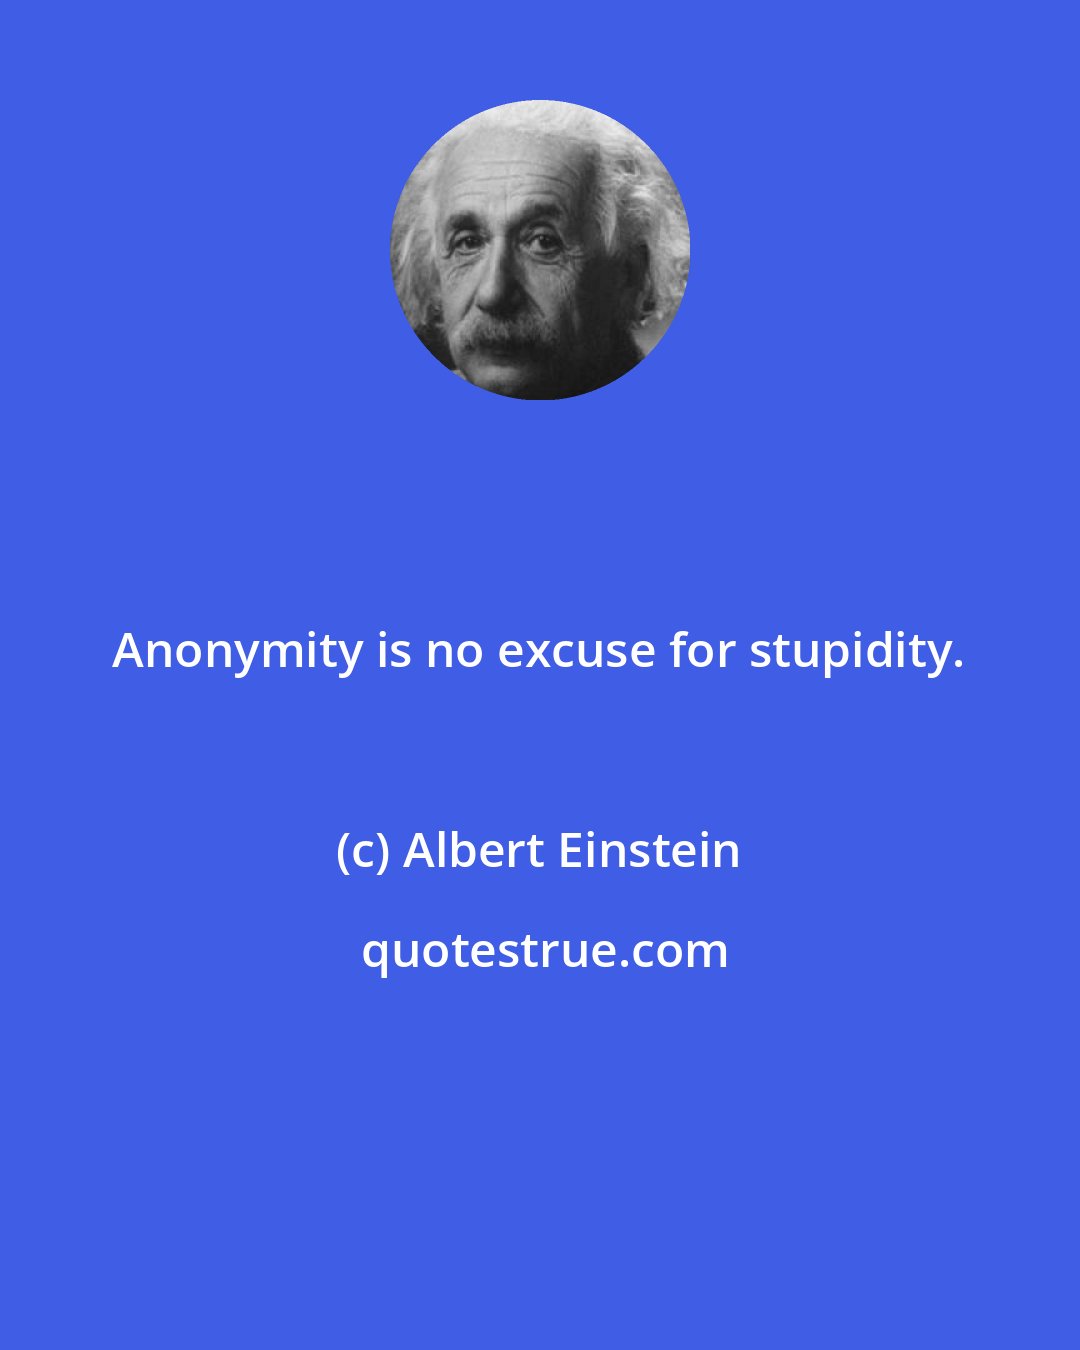 Albert Einstein: Anonymity is no excuse for stupidity.